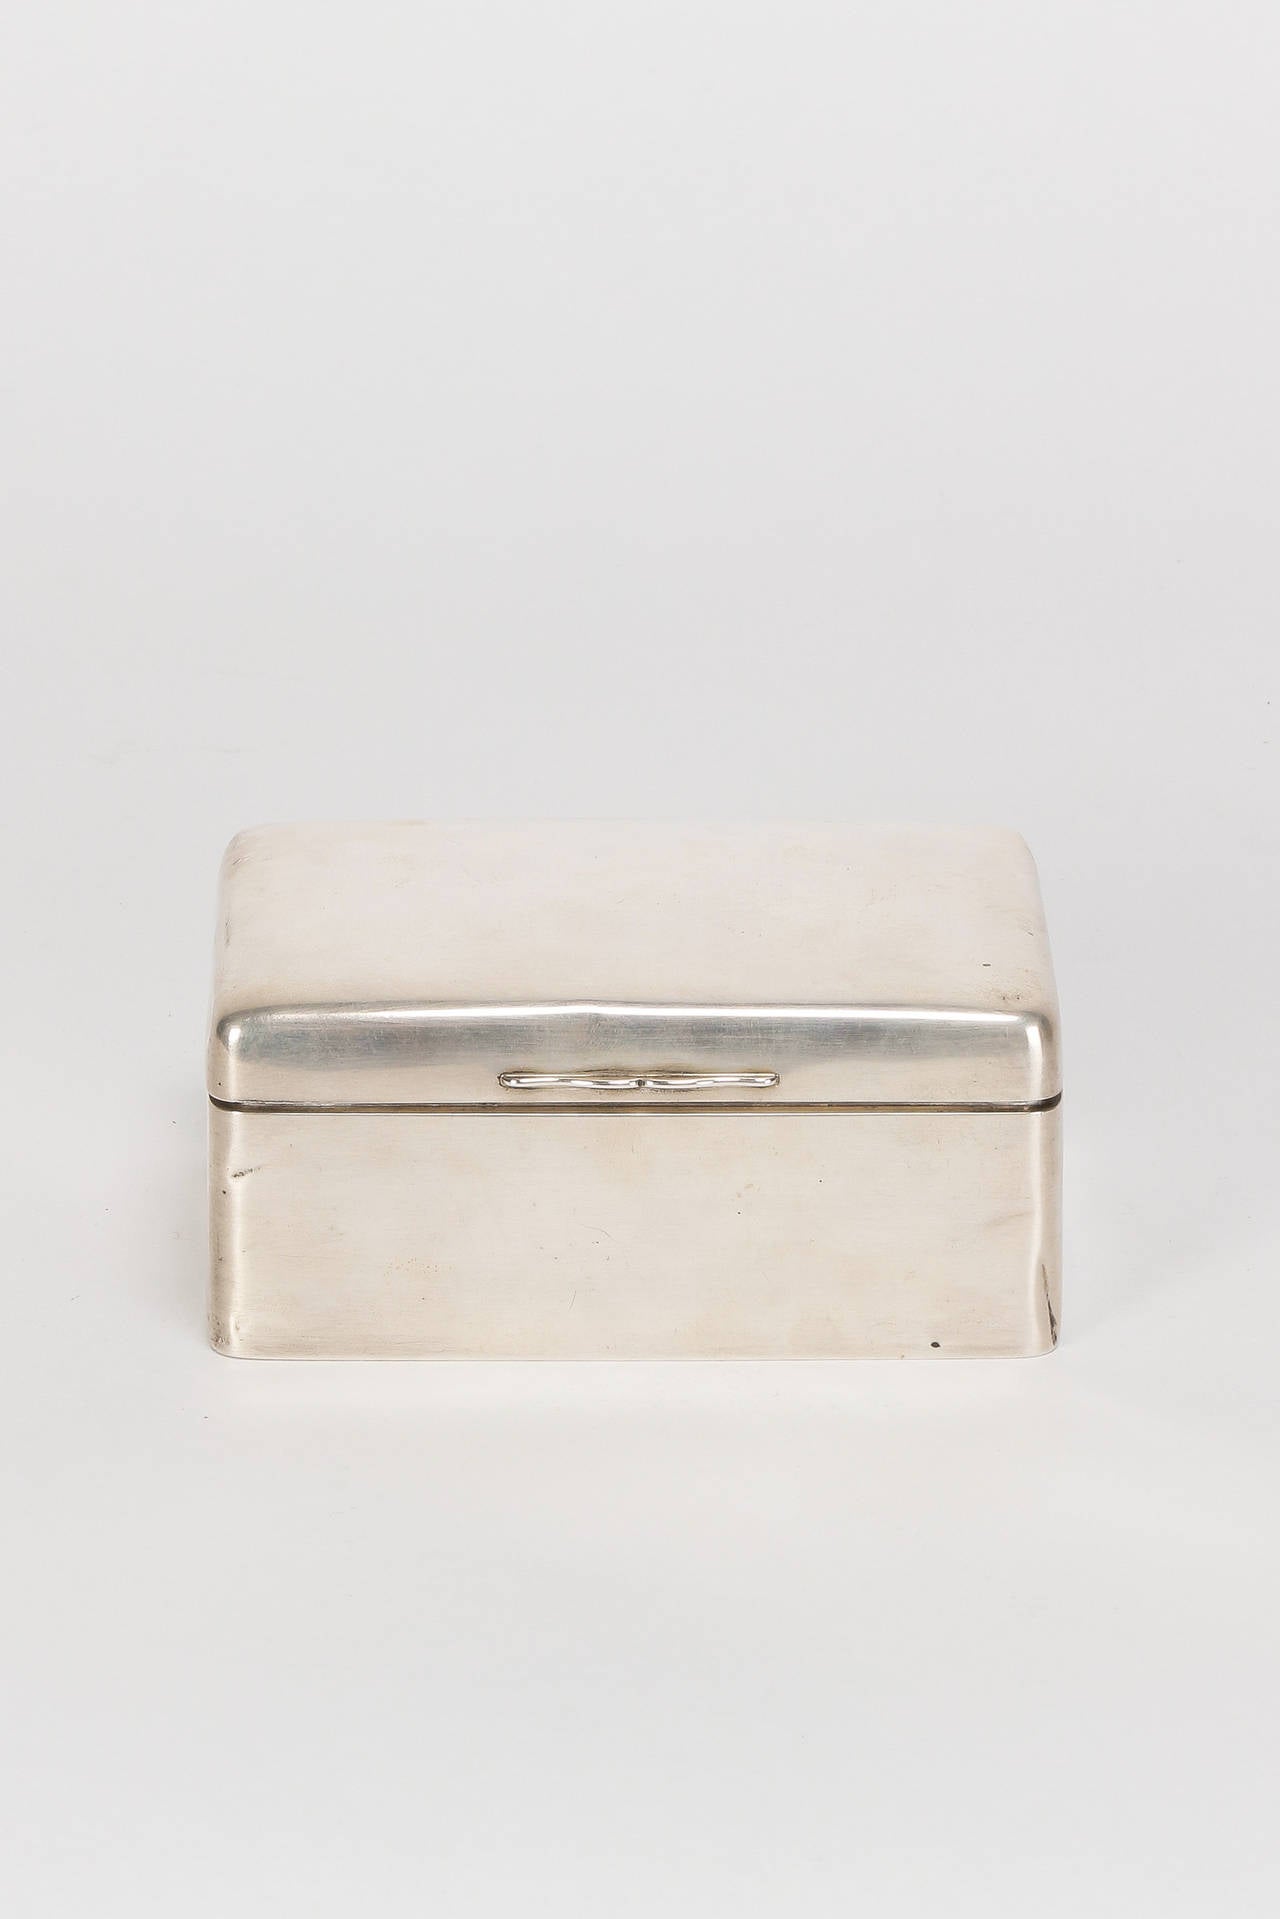 Stunning English solid silver cover box by the silversmiths Arthur & John Zimmerman around 1910, Birmingham England.
The surface of the box is plain apart from the hallmarks and a few dents on the corners due to it's age. The body is lined with